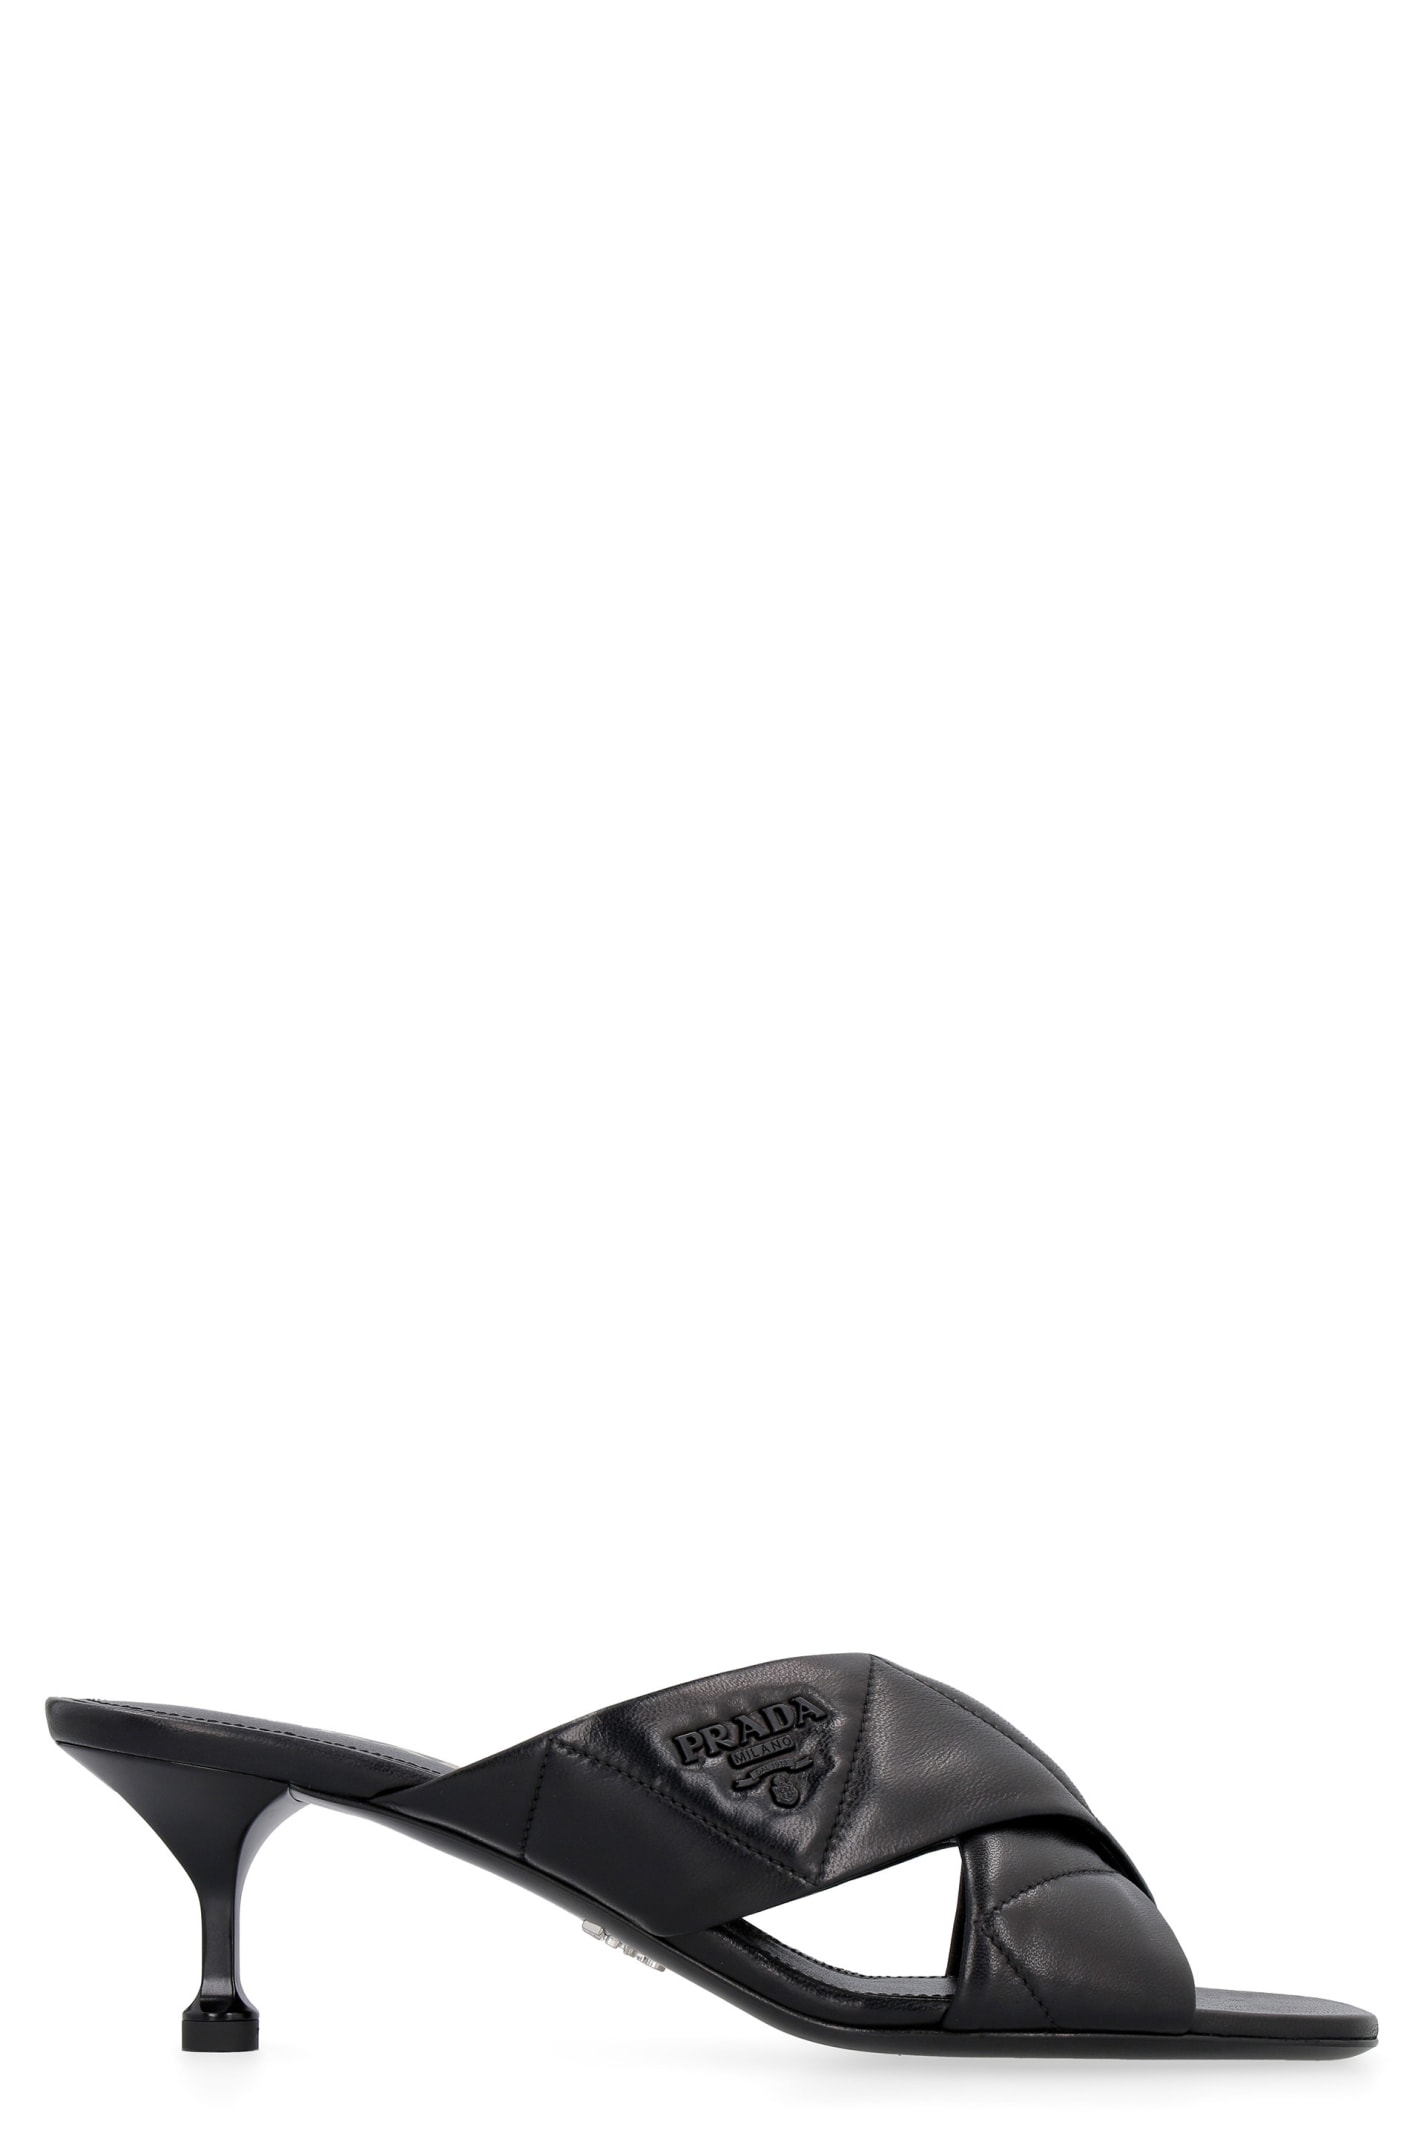 Buy Prada Leather Mules online, shop Prada shoes with free shipping